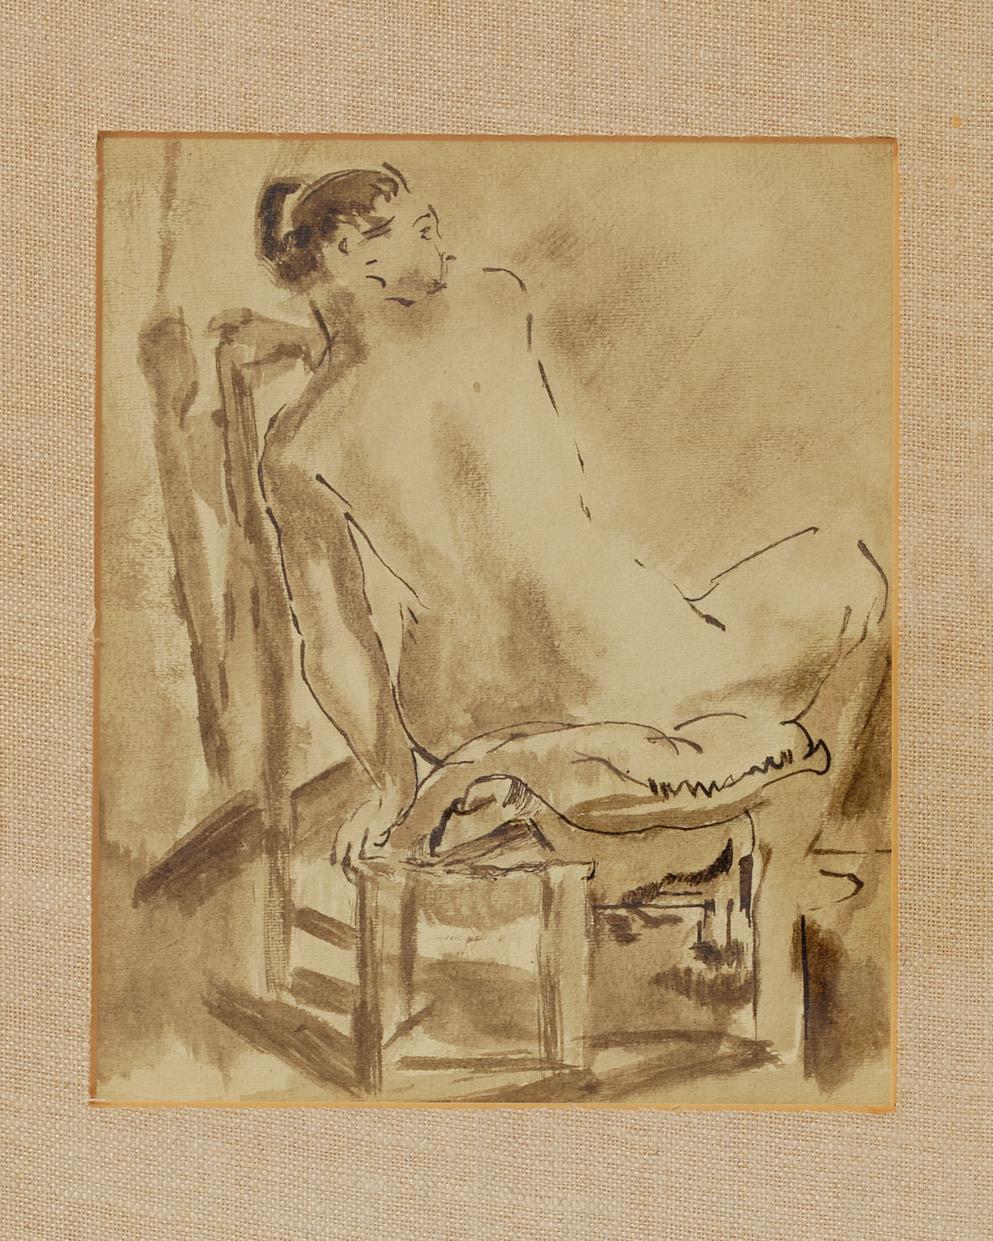 Nude painting of a woman, back view. The technique is ink wash. Painting is on paper with a wood frame, C 1950. Original wood framing.